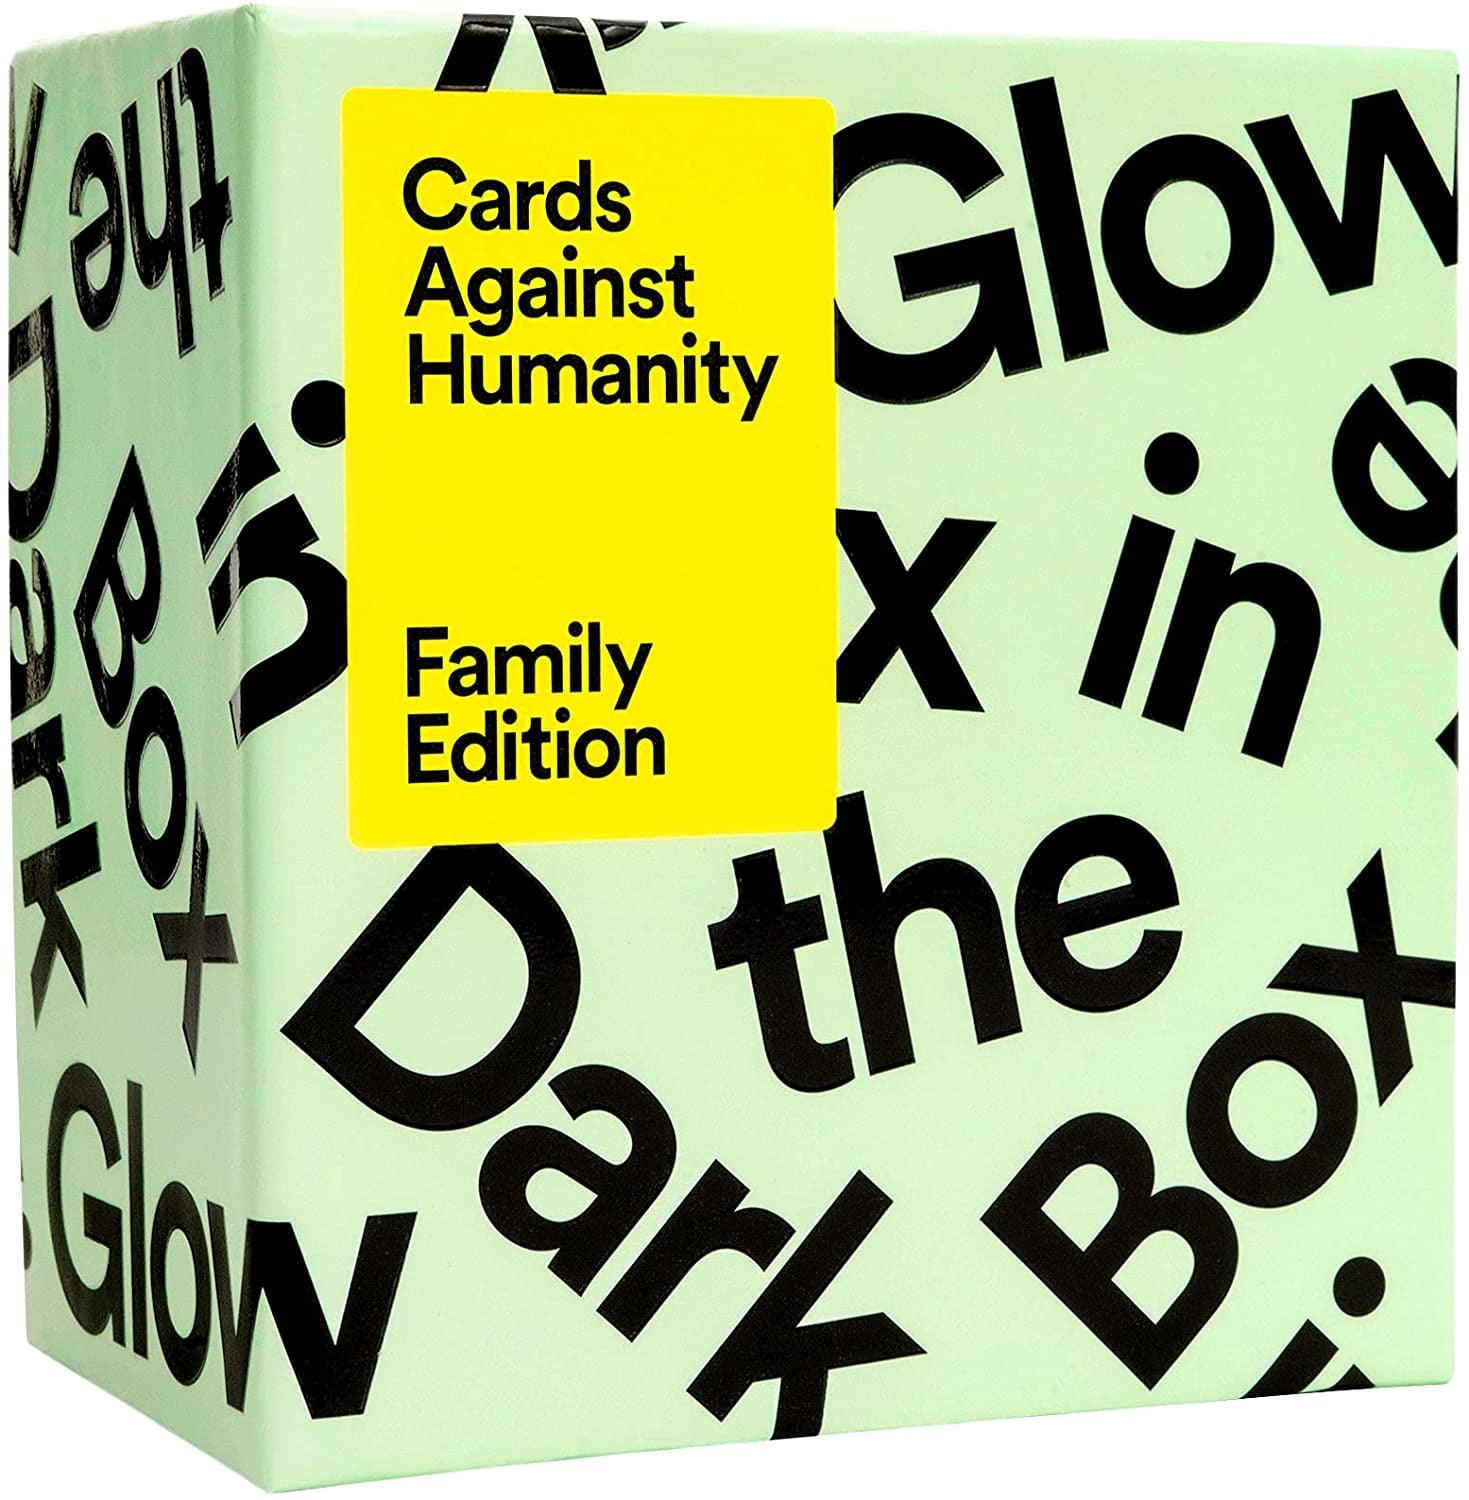 VR-91428 Cards Against Humanity Family Edition First Expansion Glow In The Dark Box (Do not sell on online marketplaces) - Cards Against Humanity - Titan Pop Culture